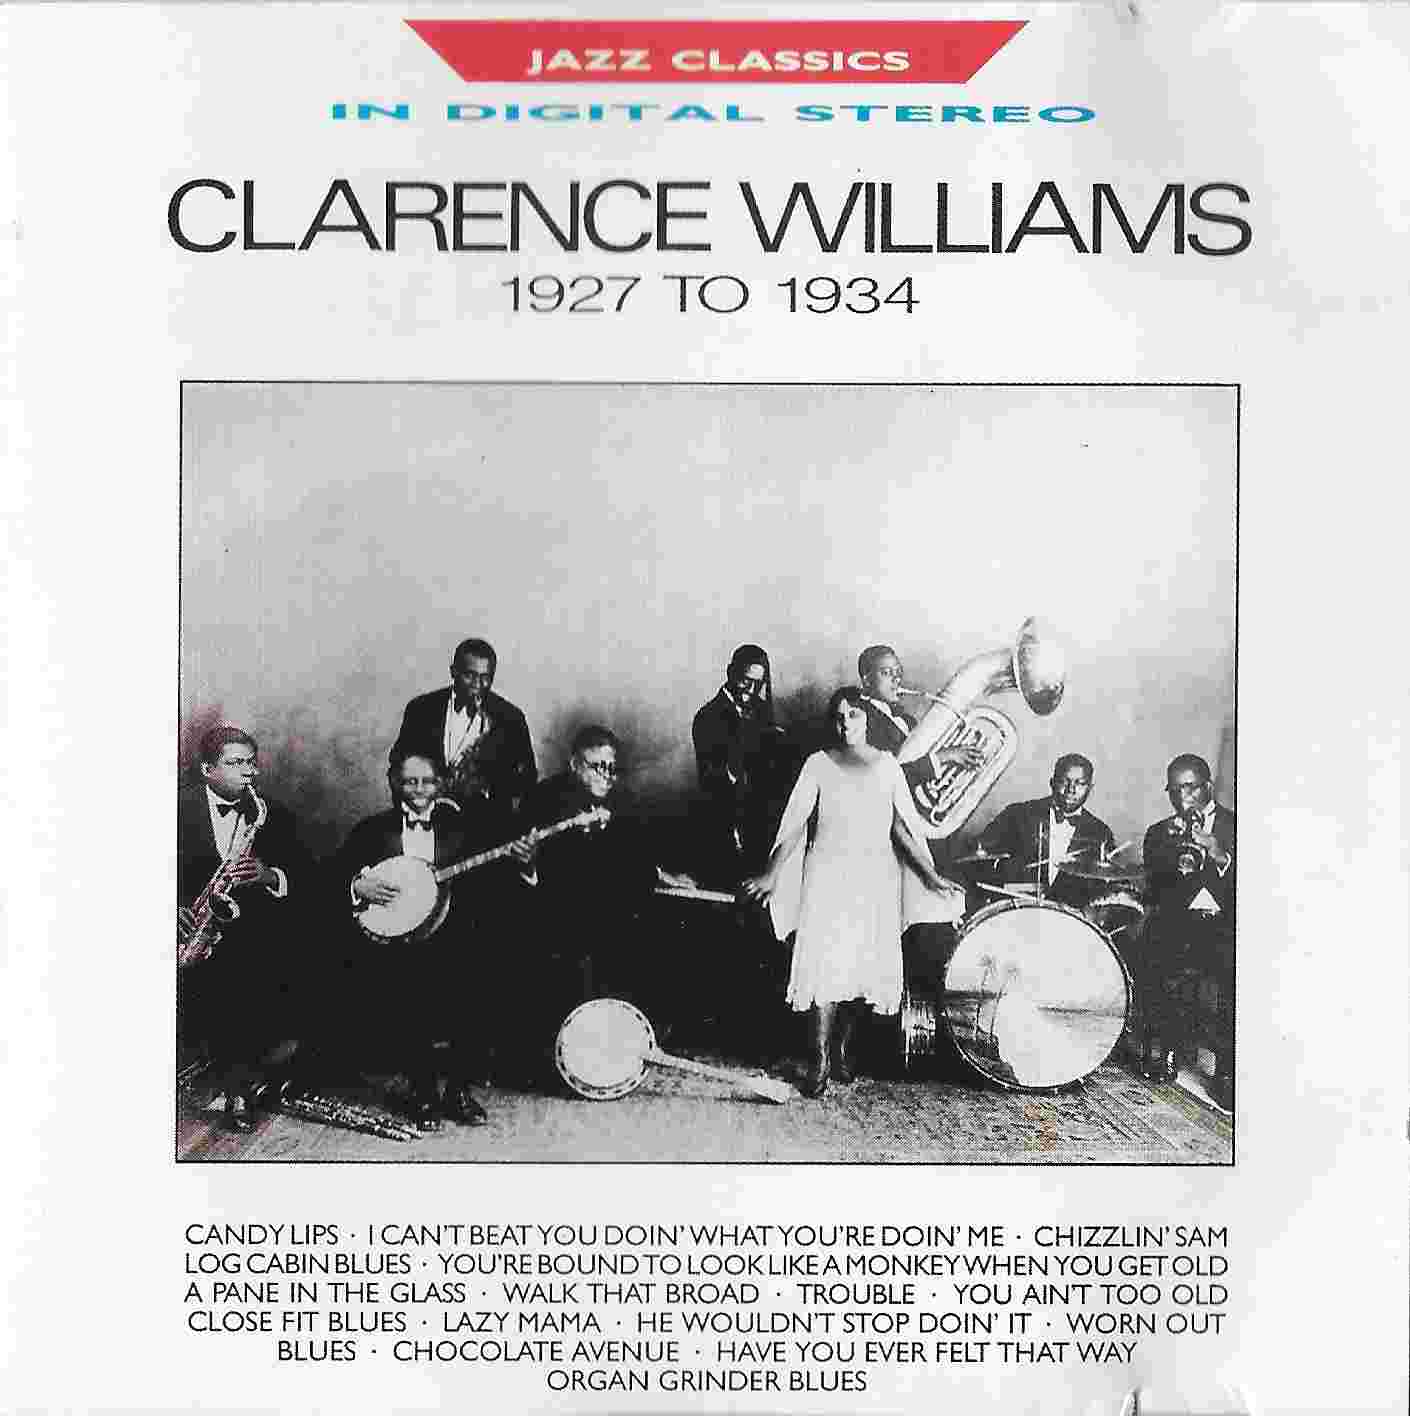 Picture of BBCCD721 Jazz classics - Clarence Williams 1927 - 1934 by artist Clarence Williams  from the BBC cds - Records and Tapes library